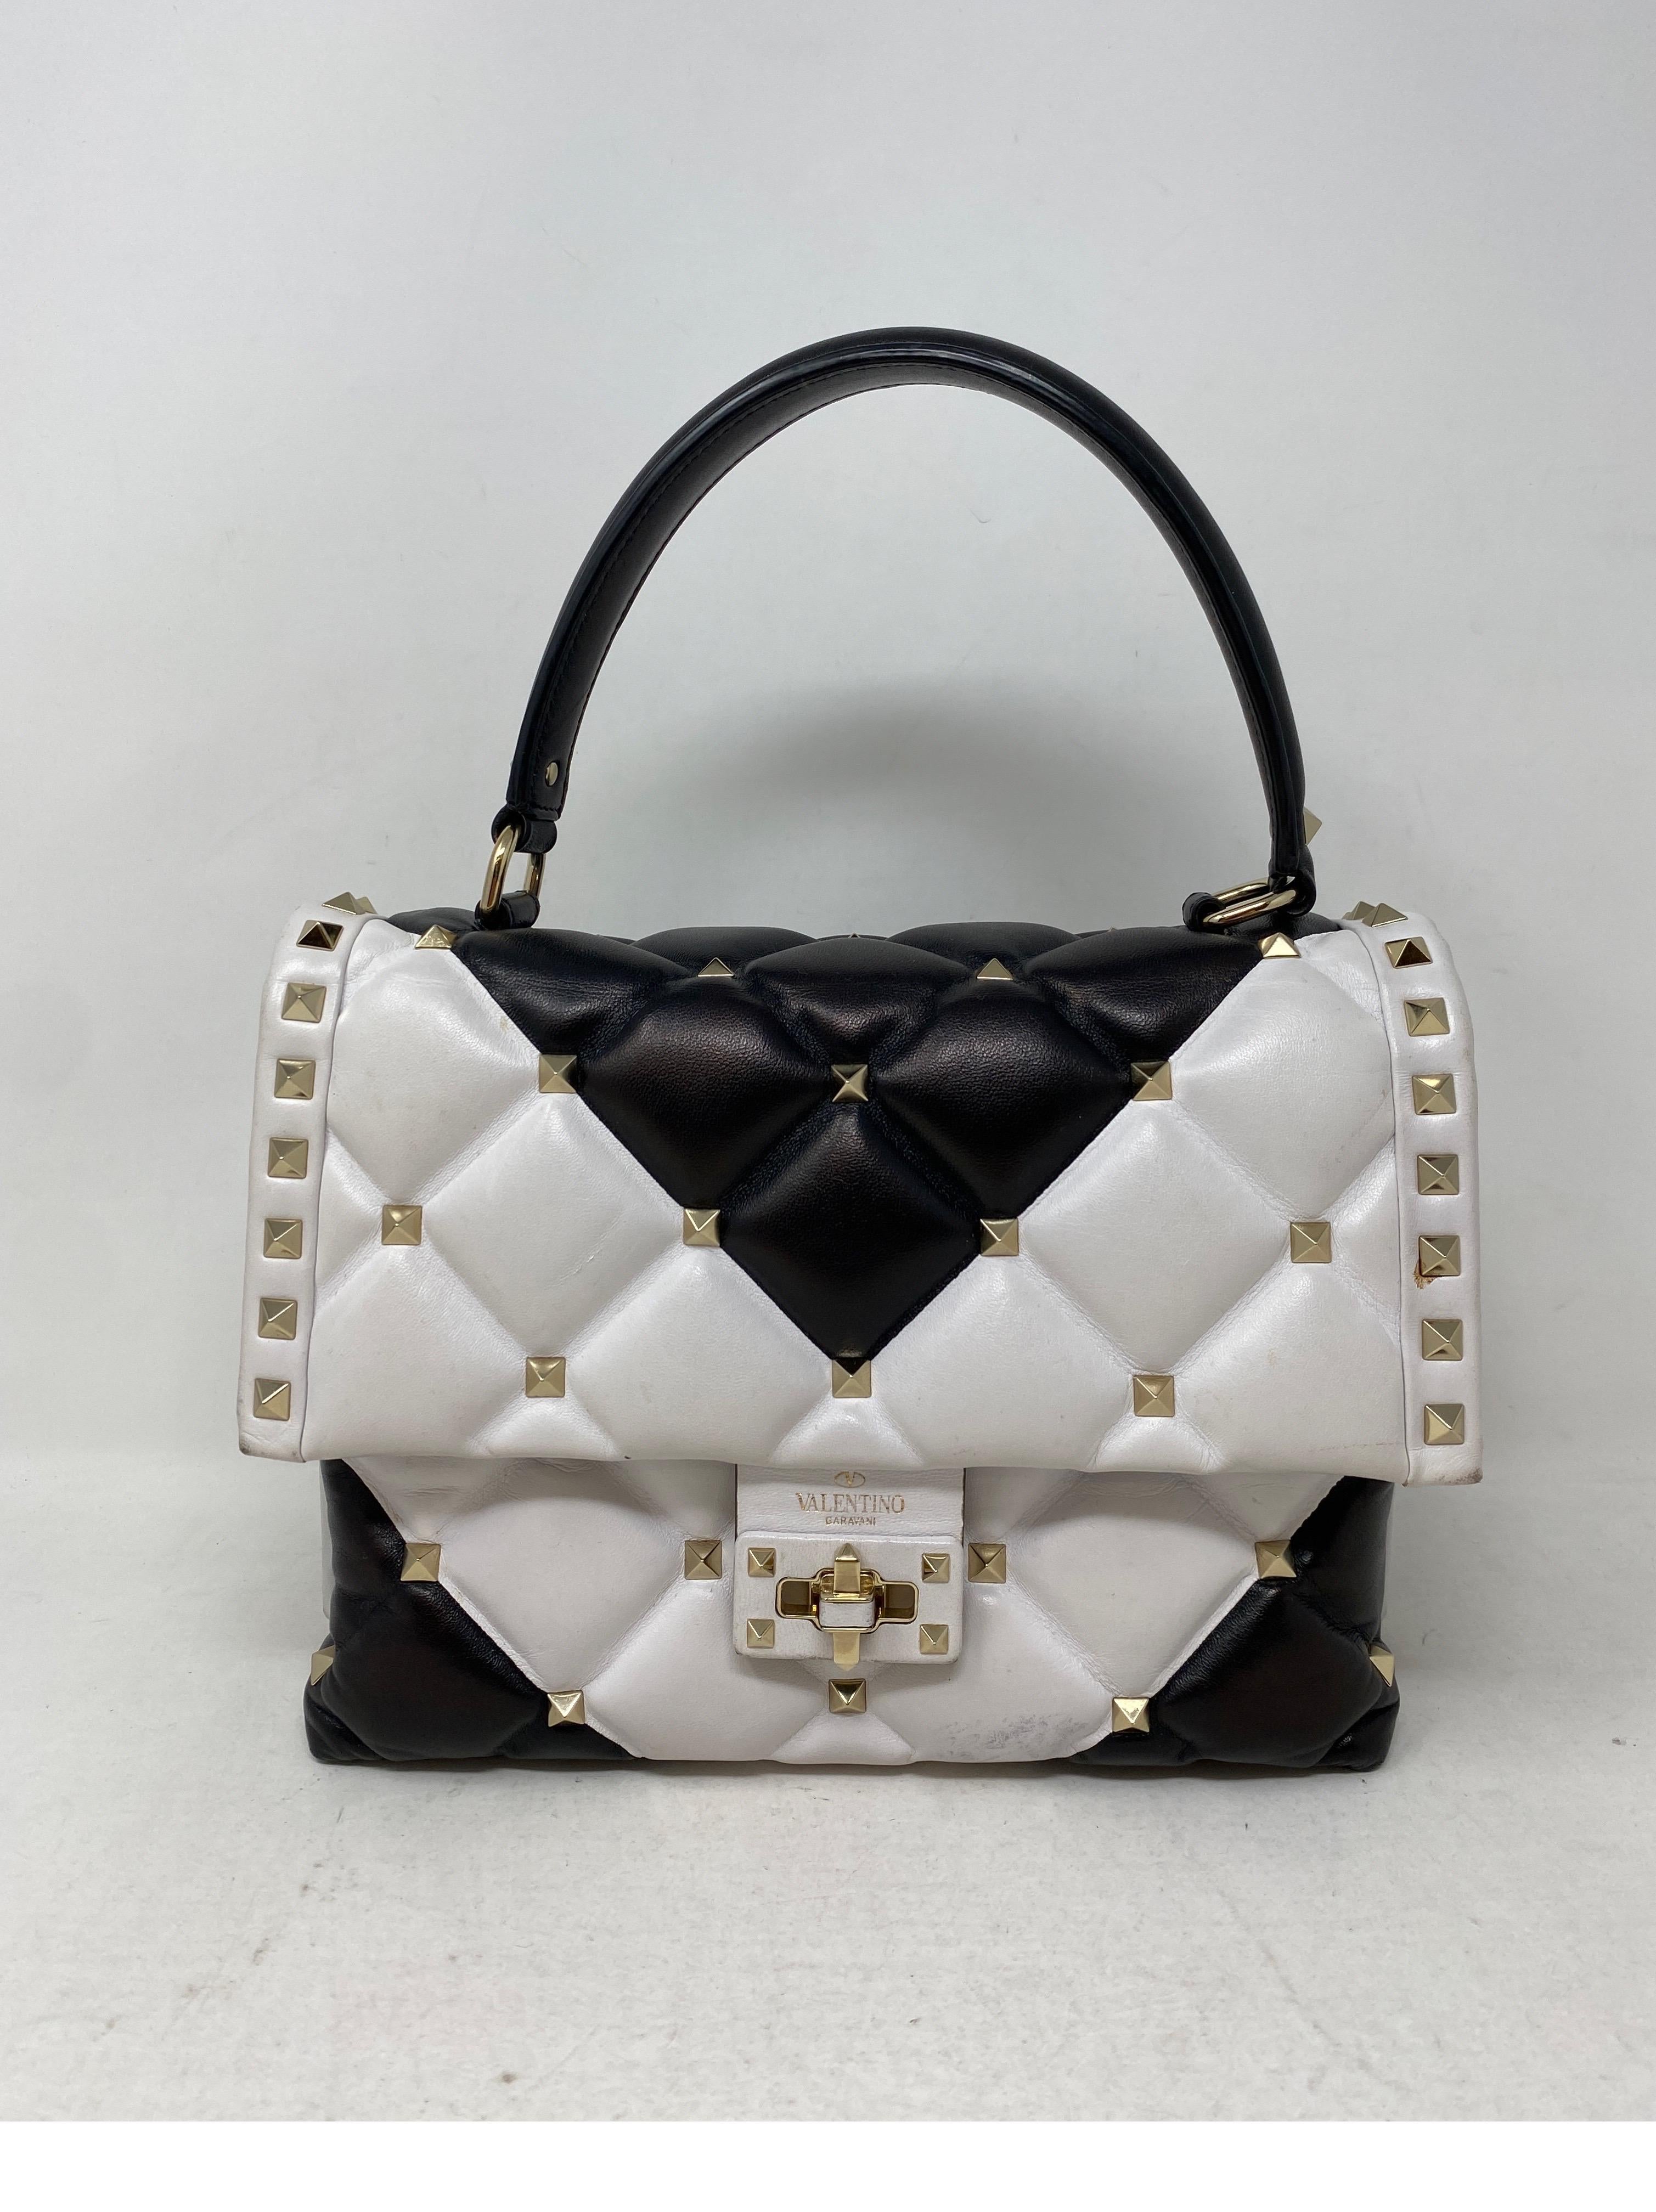 Valentino Limited Edition Studded Bag. Rare white and black leather bag. Some light wear on bottom of the bag. Very cool design. Has a strap that can be worn with or without. Clean interior. Guaranteed authentic. 